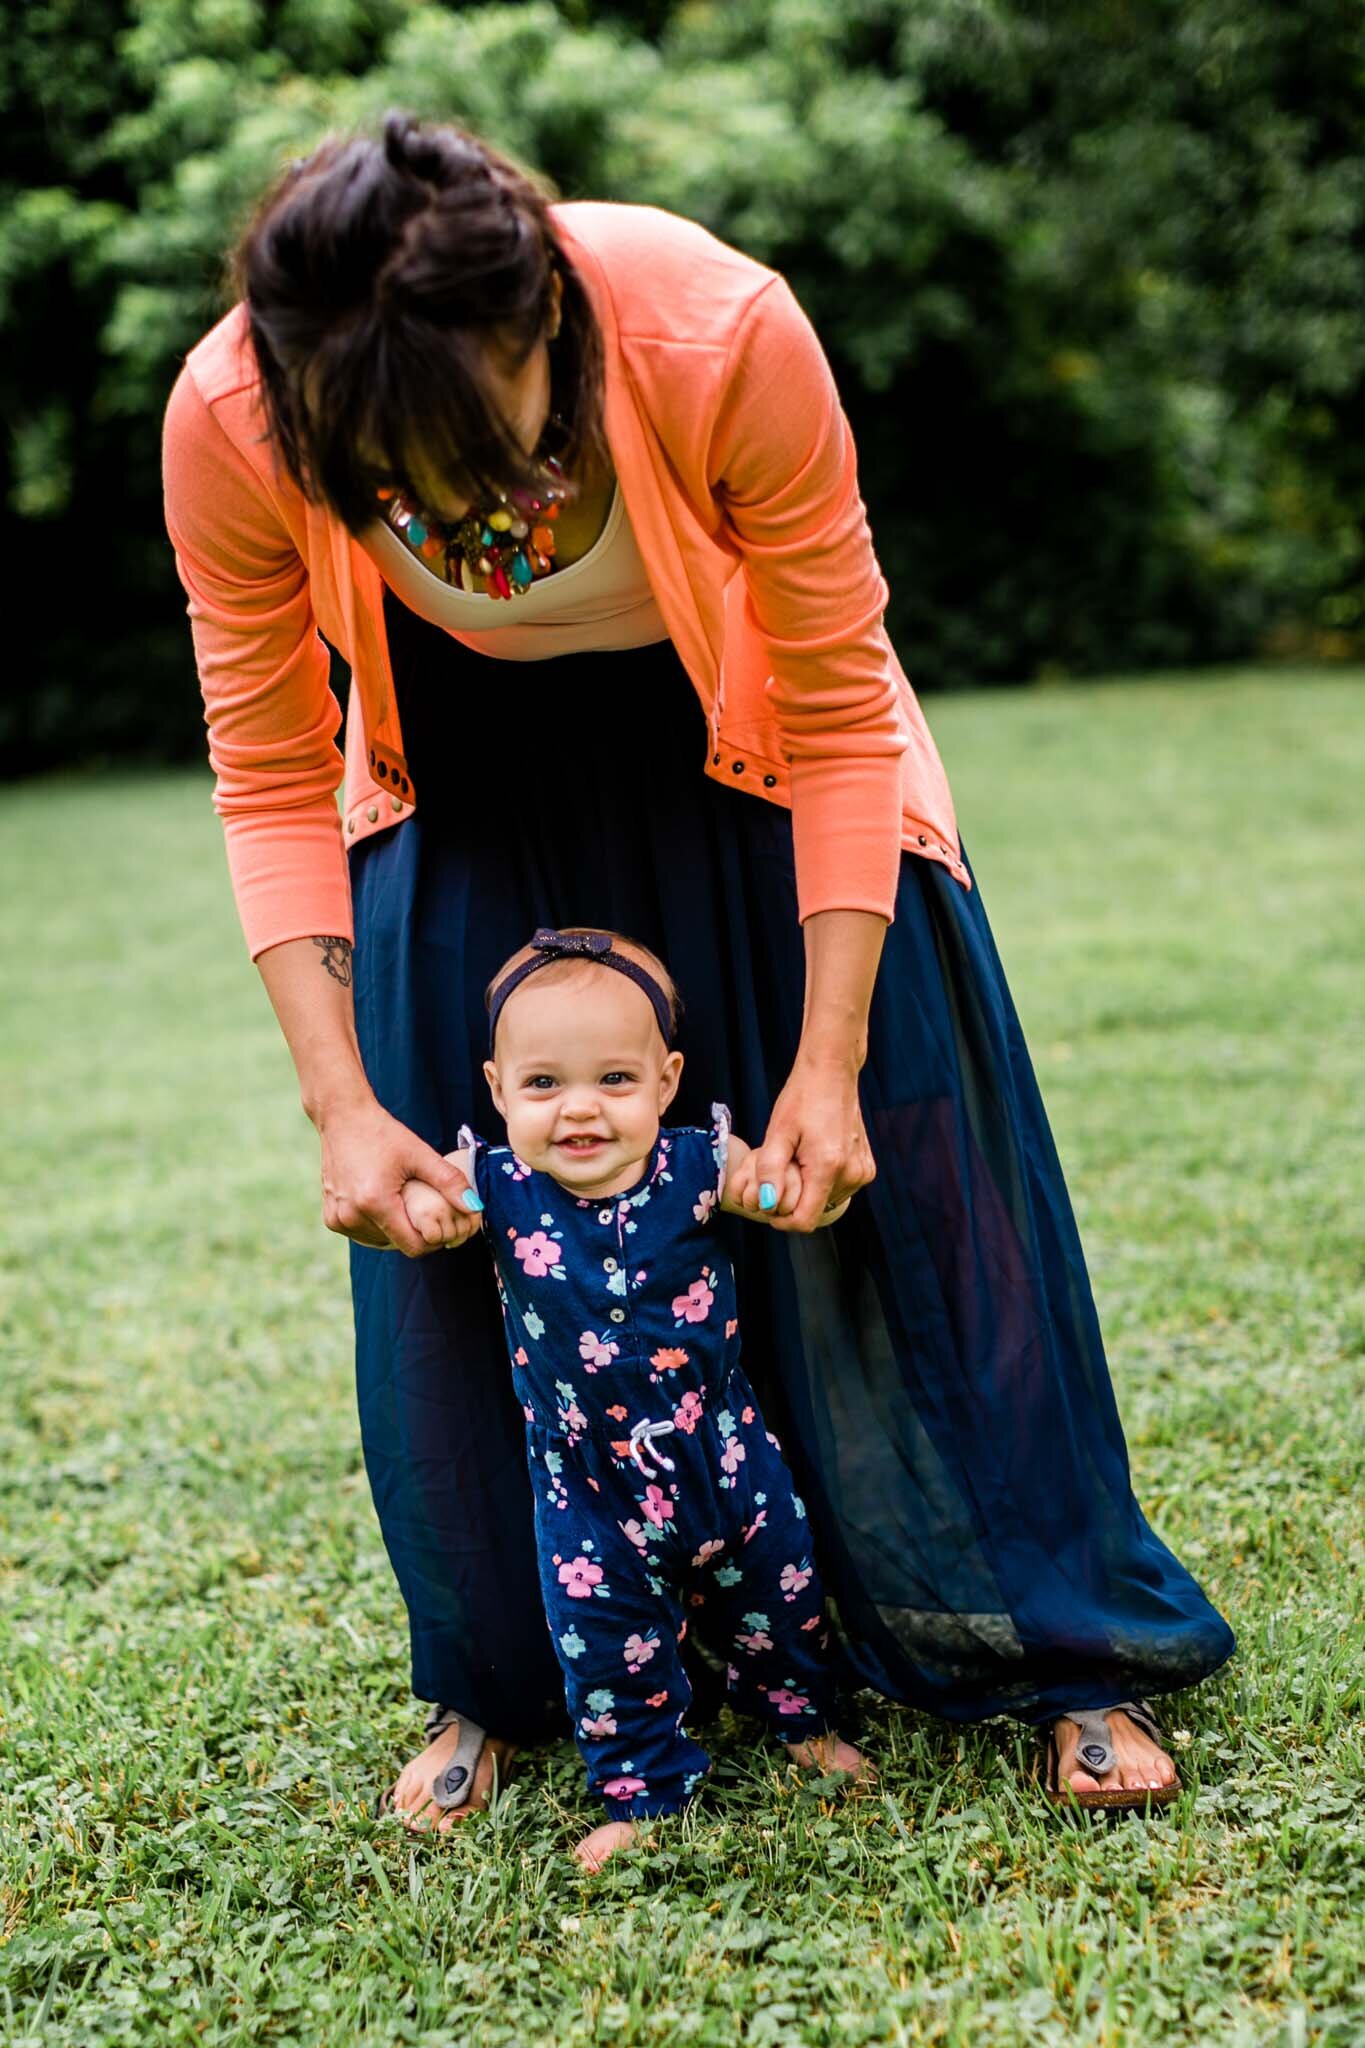 Raleigh Family Photographer | By G. Lin Photography | Mother helping baby girl walking on grass